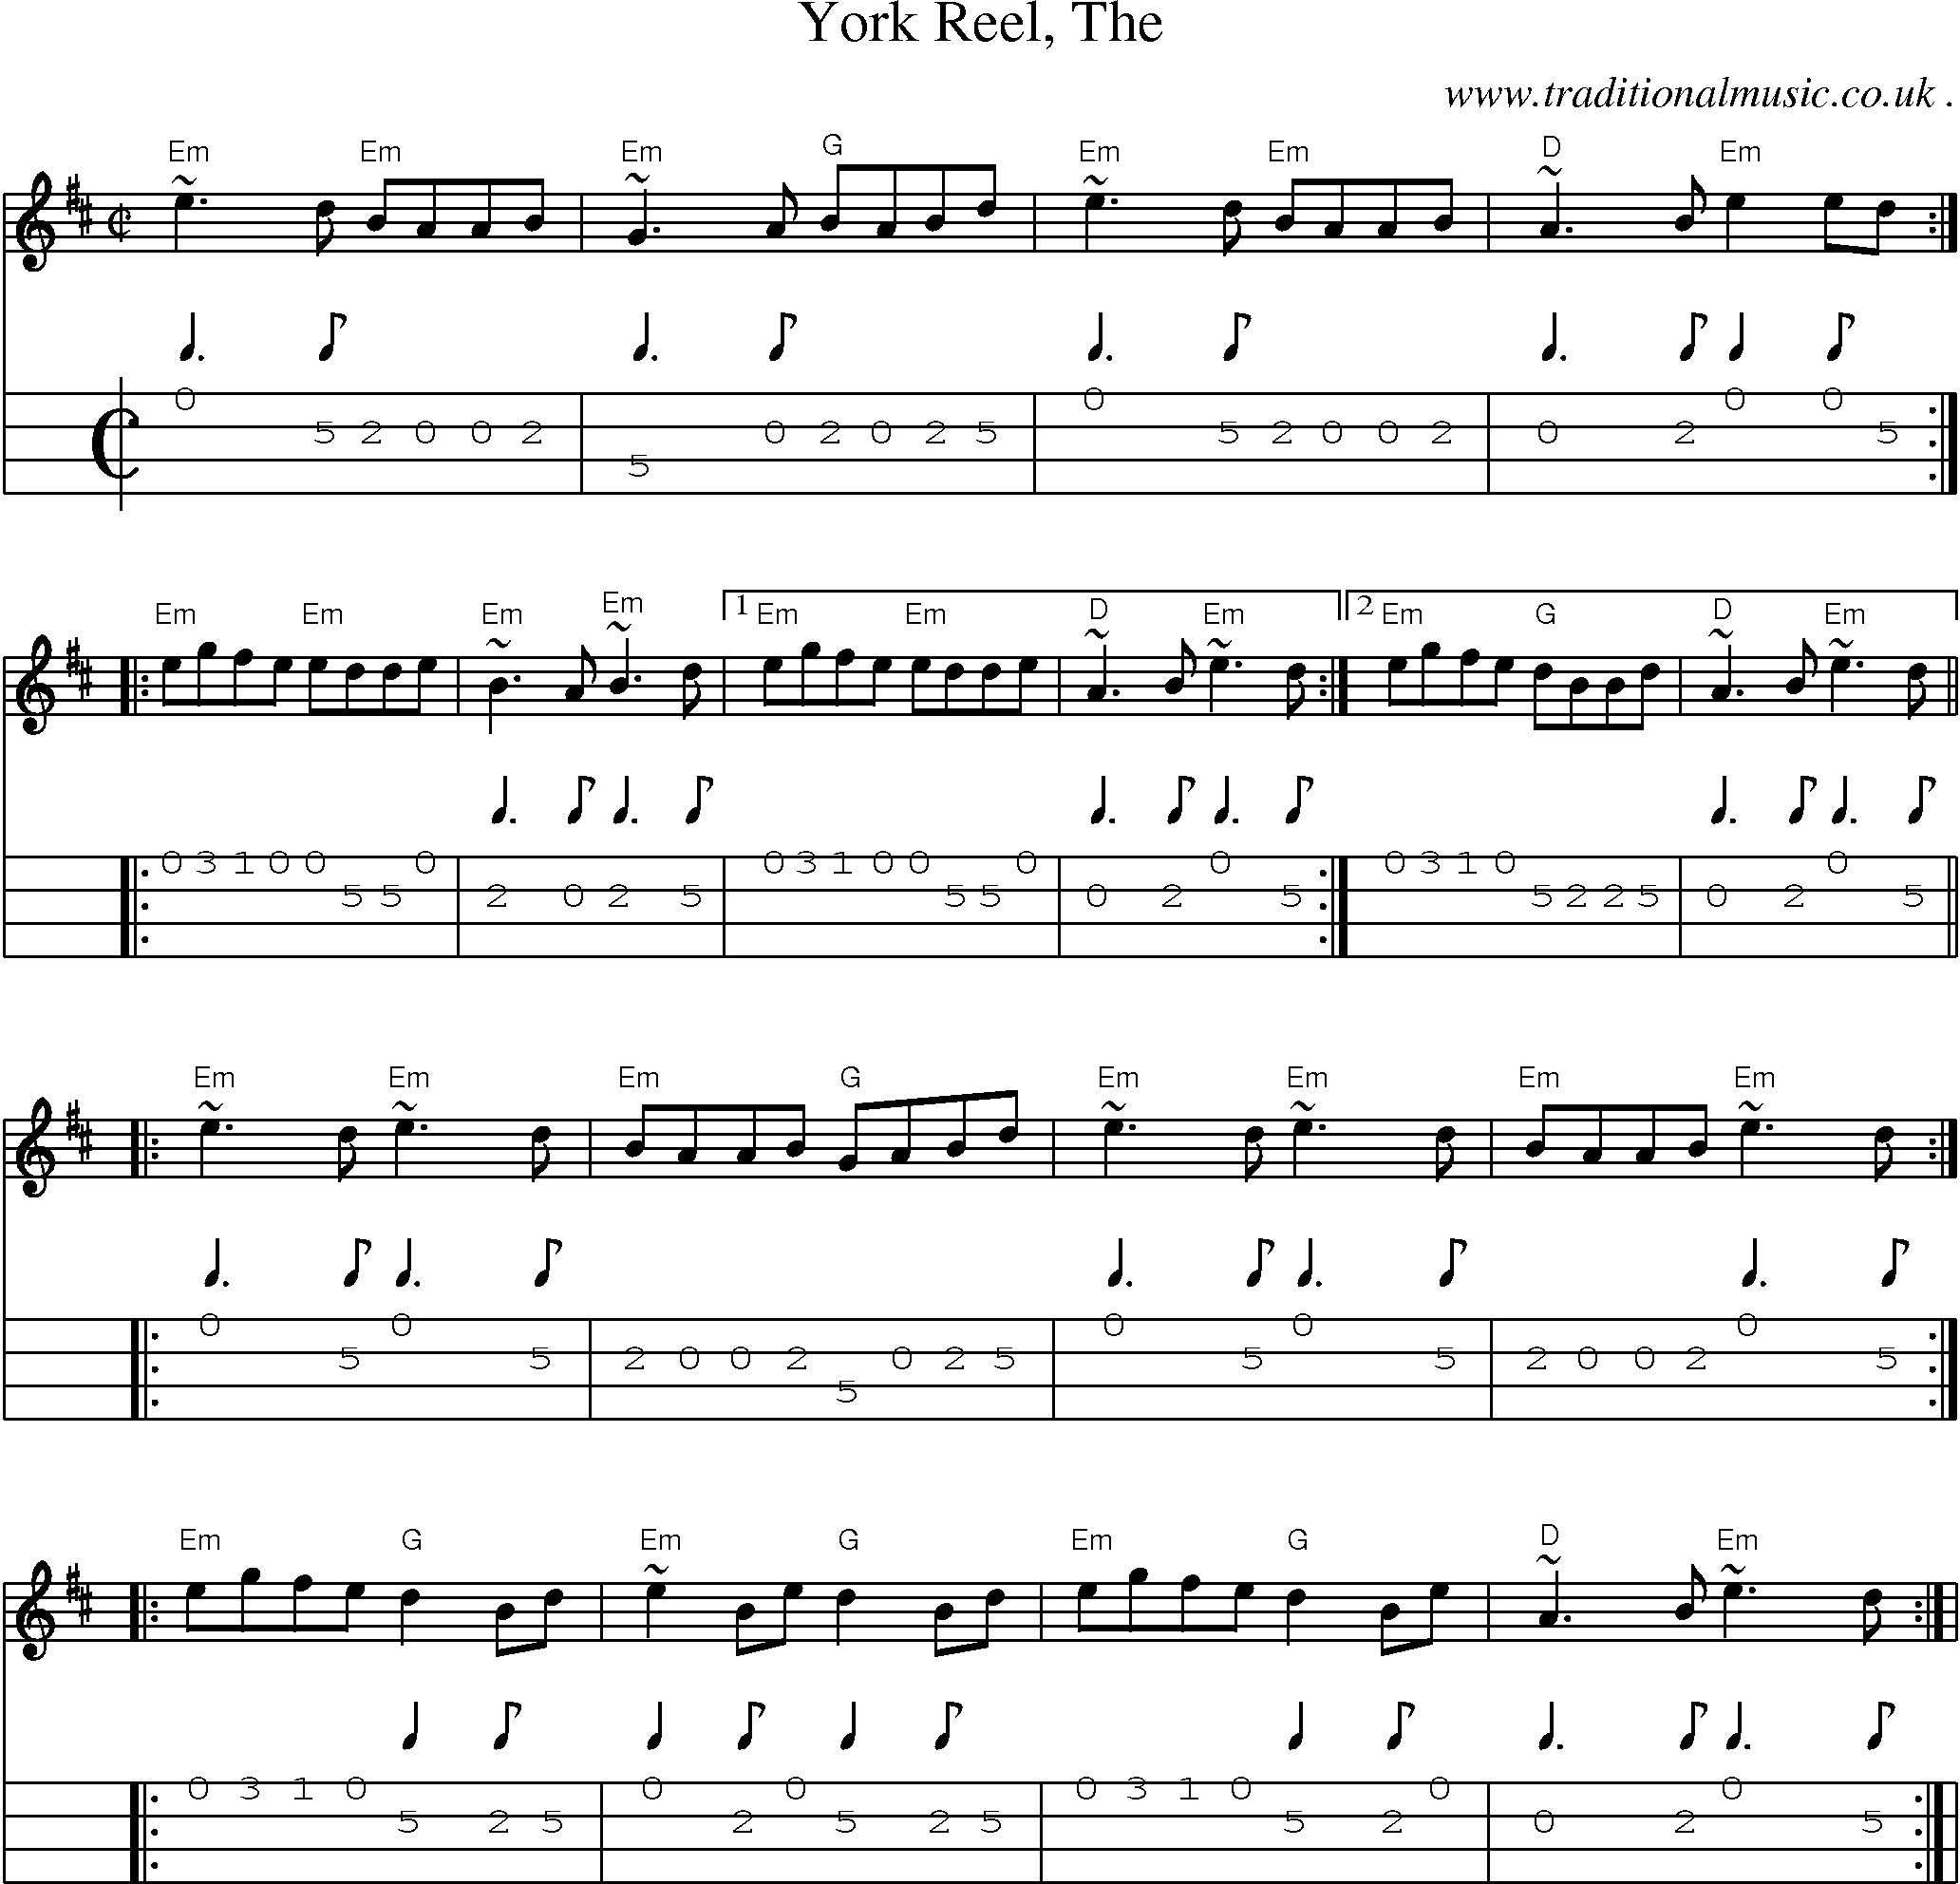 Music Score and Guitar Tabs for York Reel The